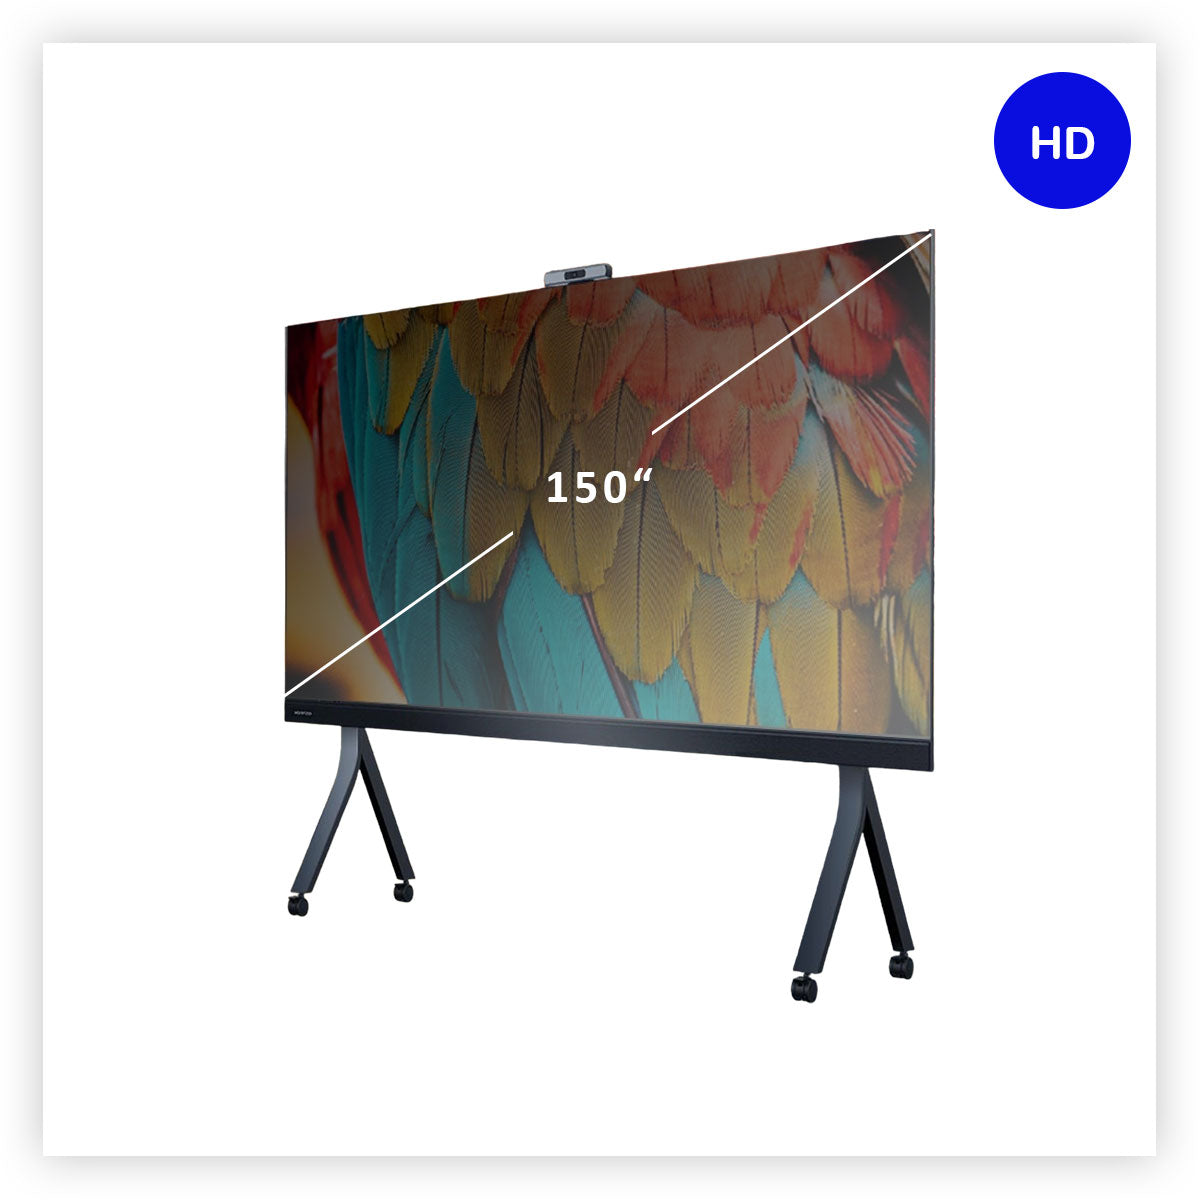 Majestic All-in-One HD 150" P1.7mm